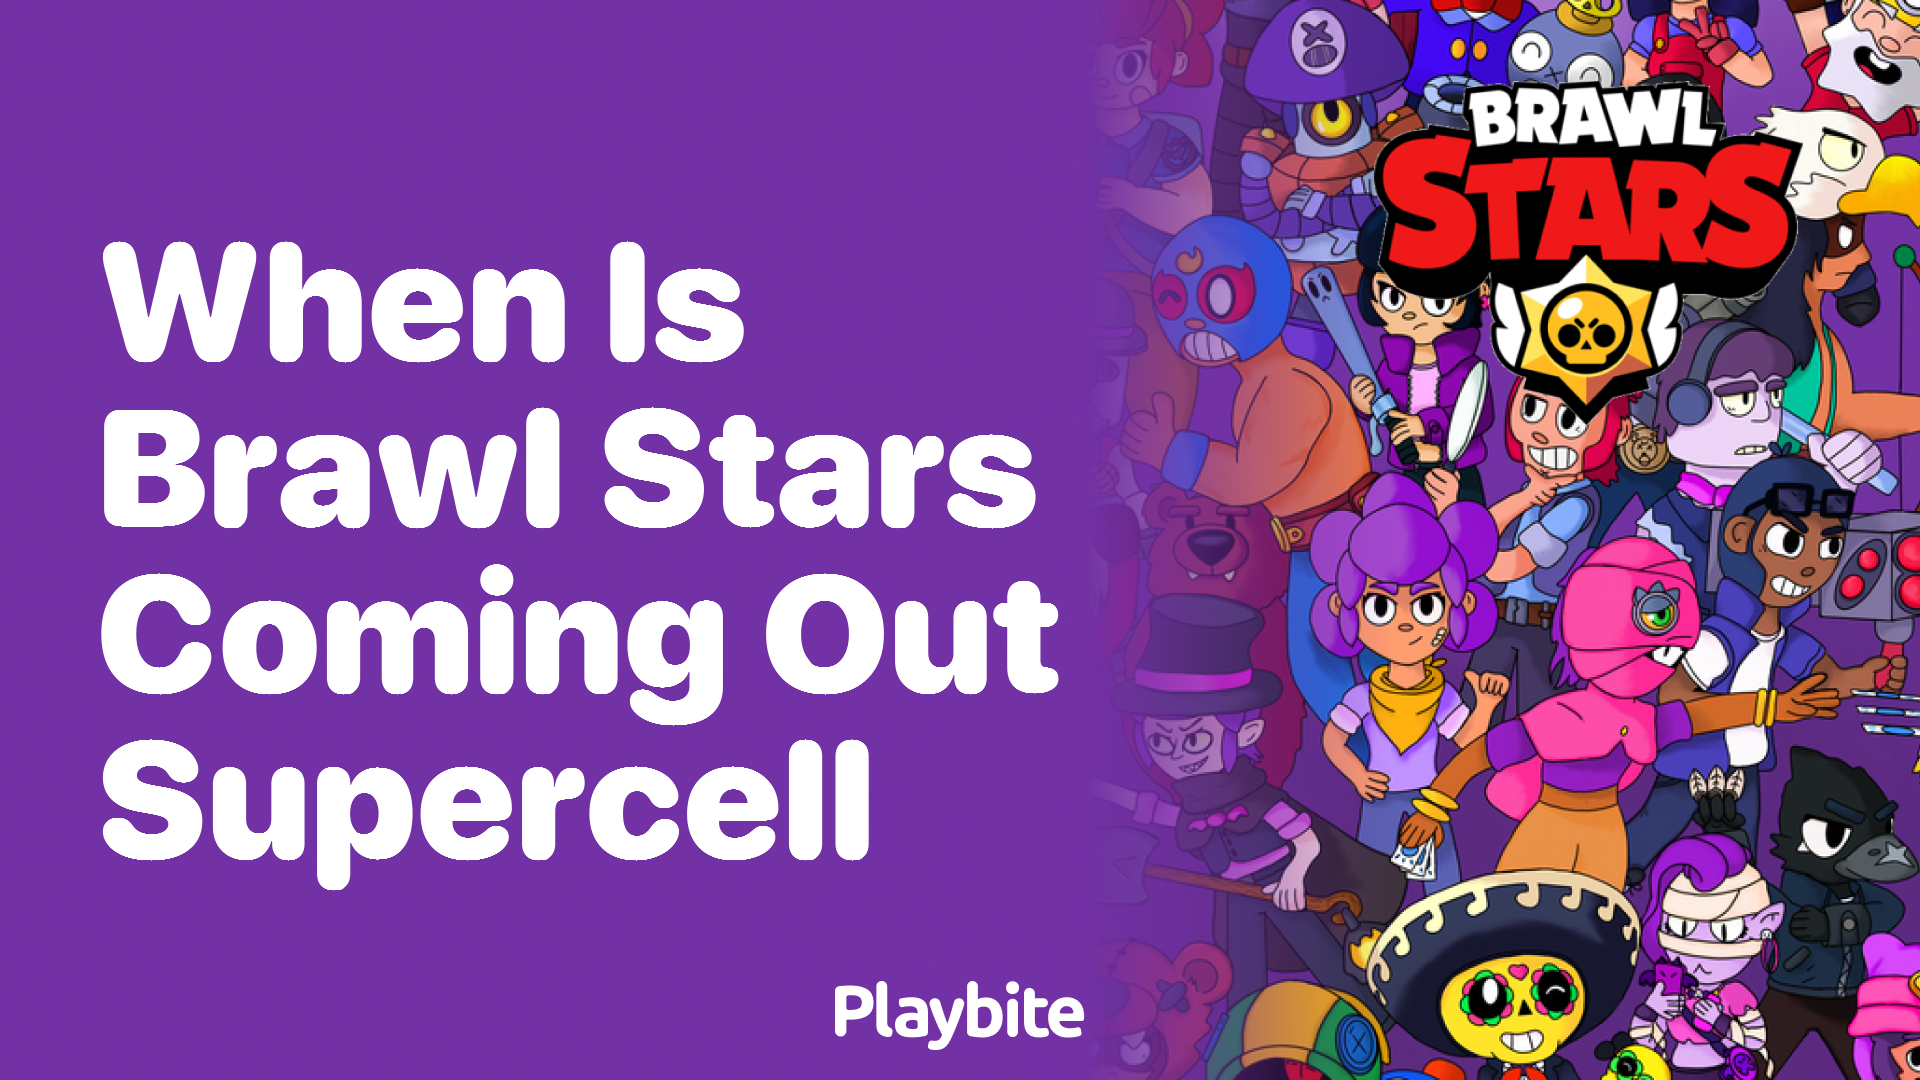 When is Brawl Stars Coming Out by Supercell? - Playbite